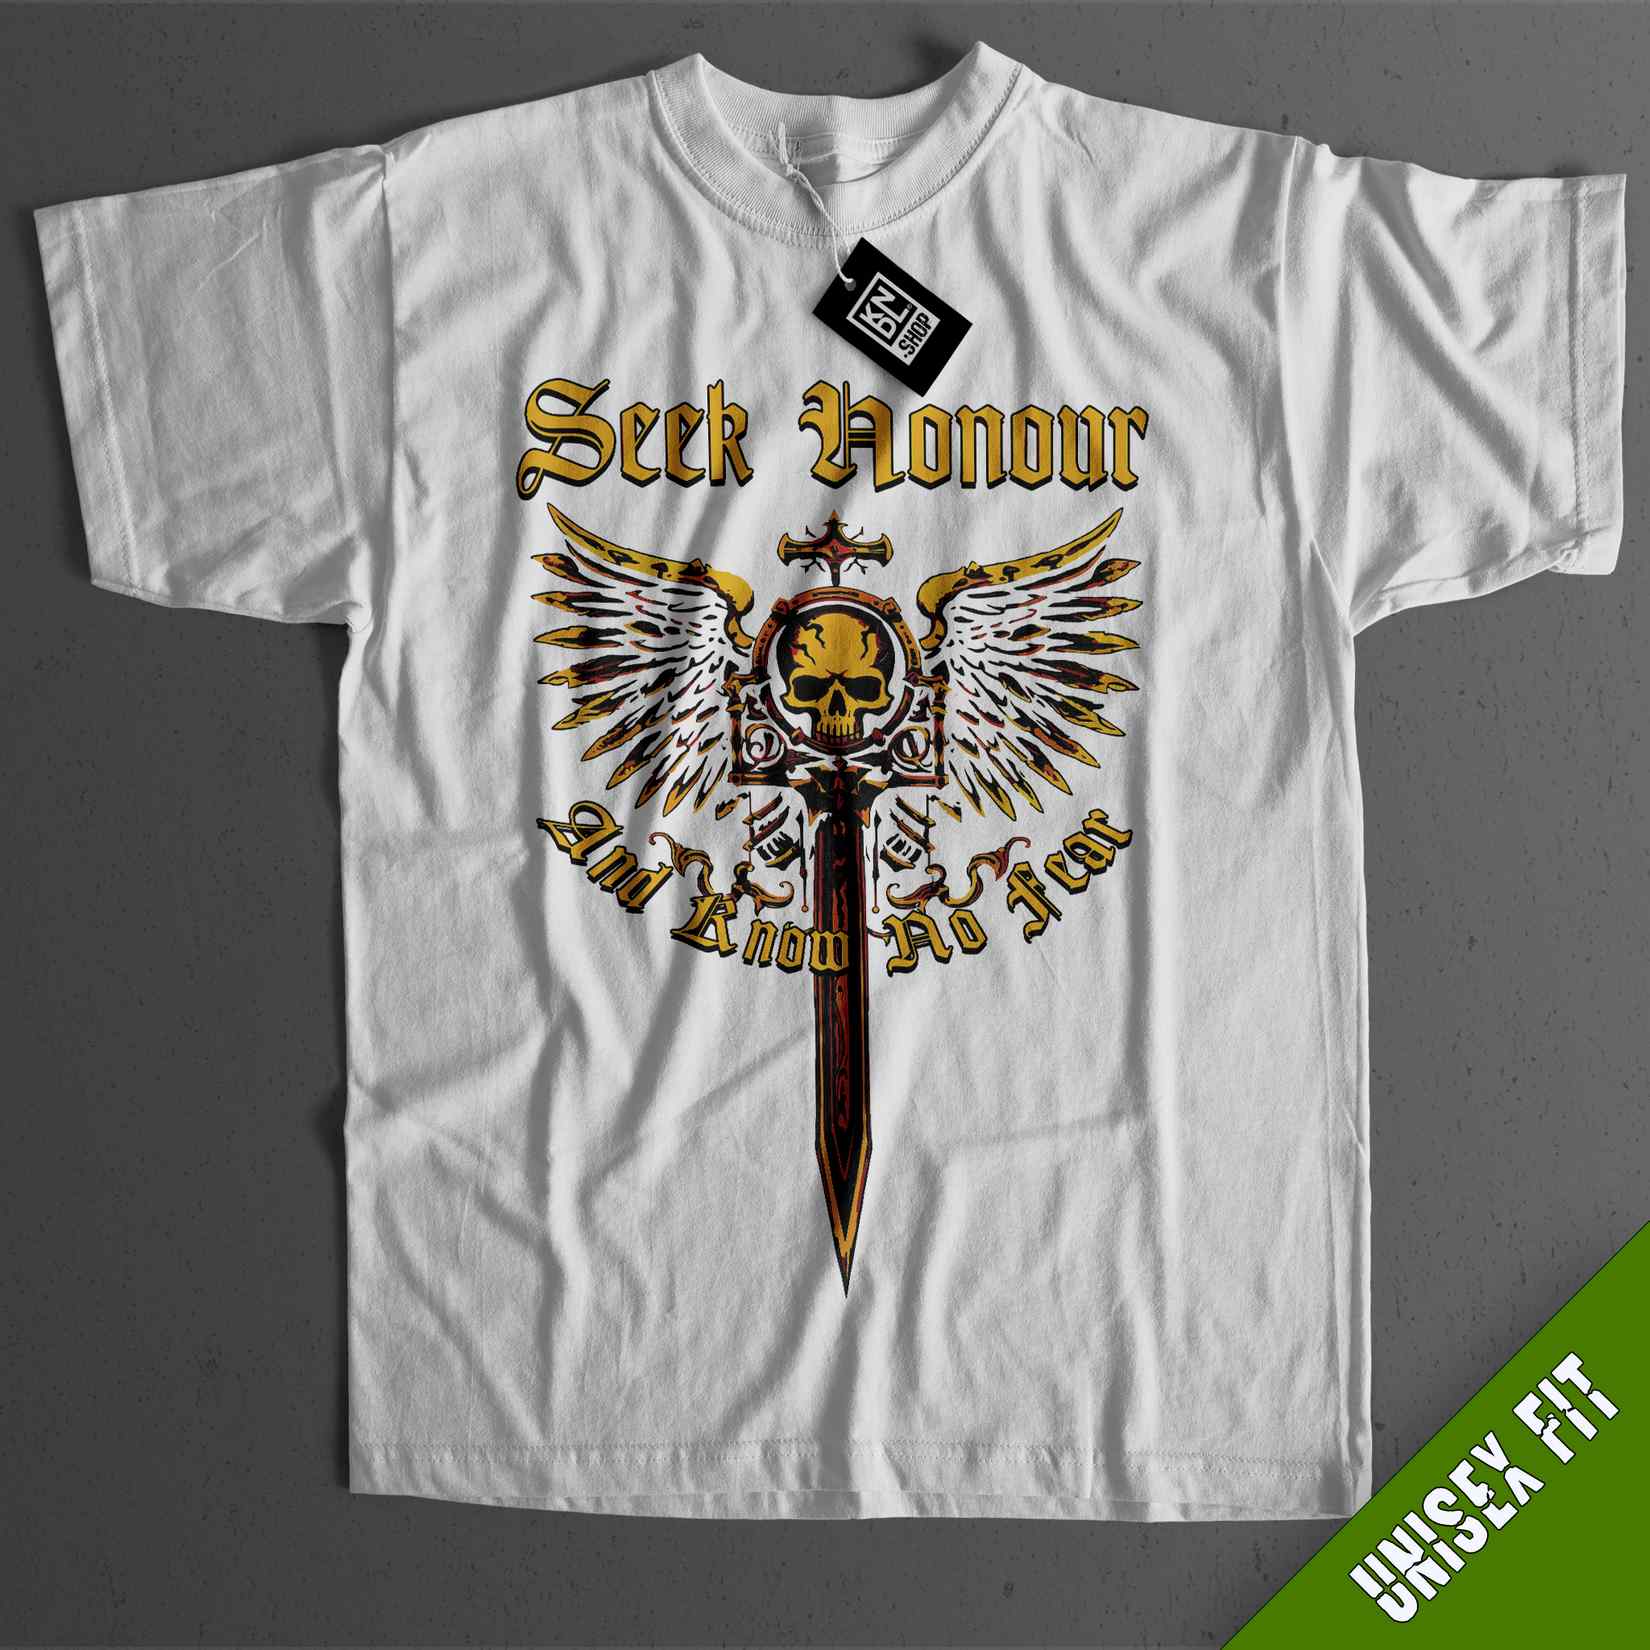 a white shirt with a sword and wings on it